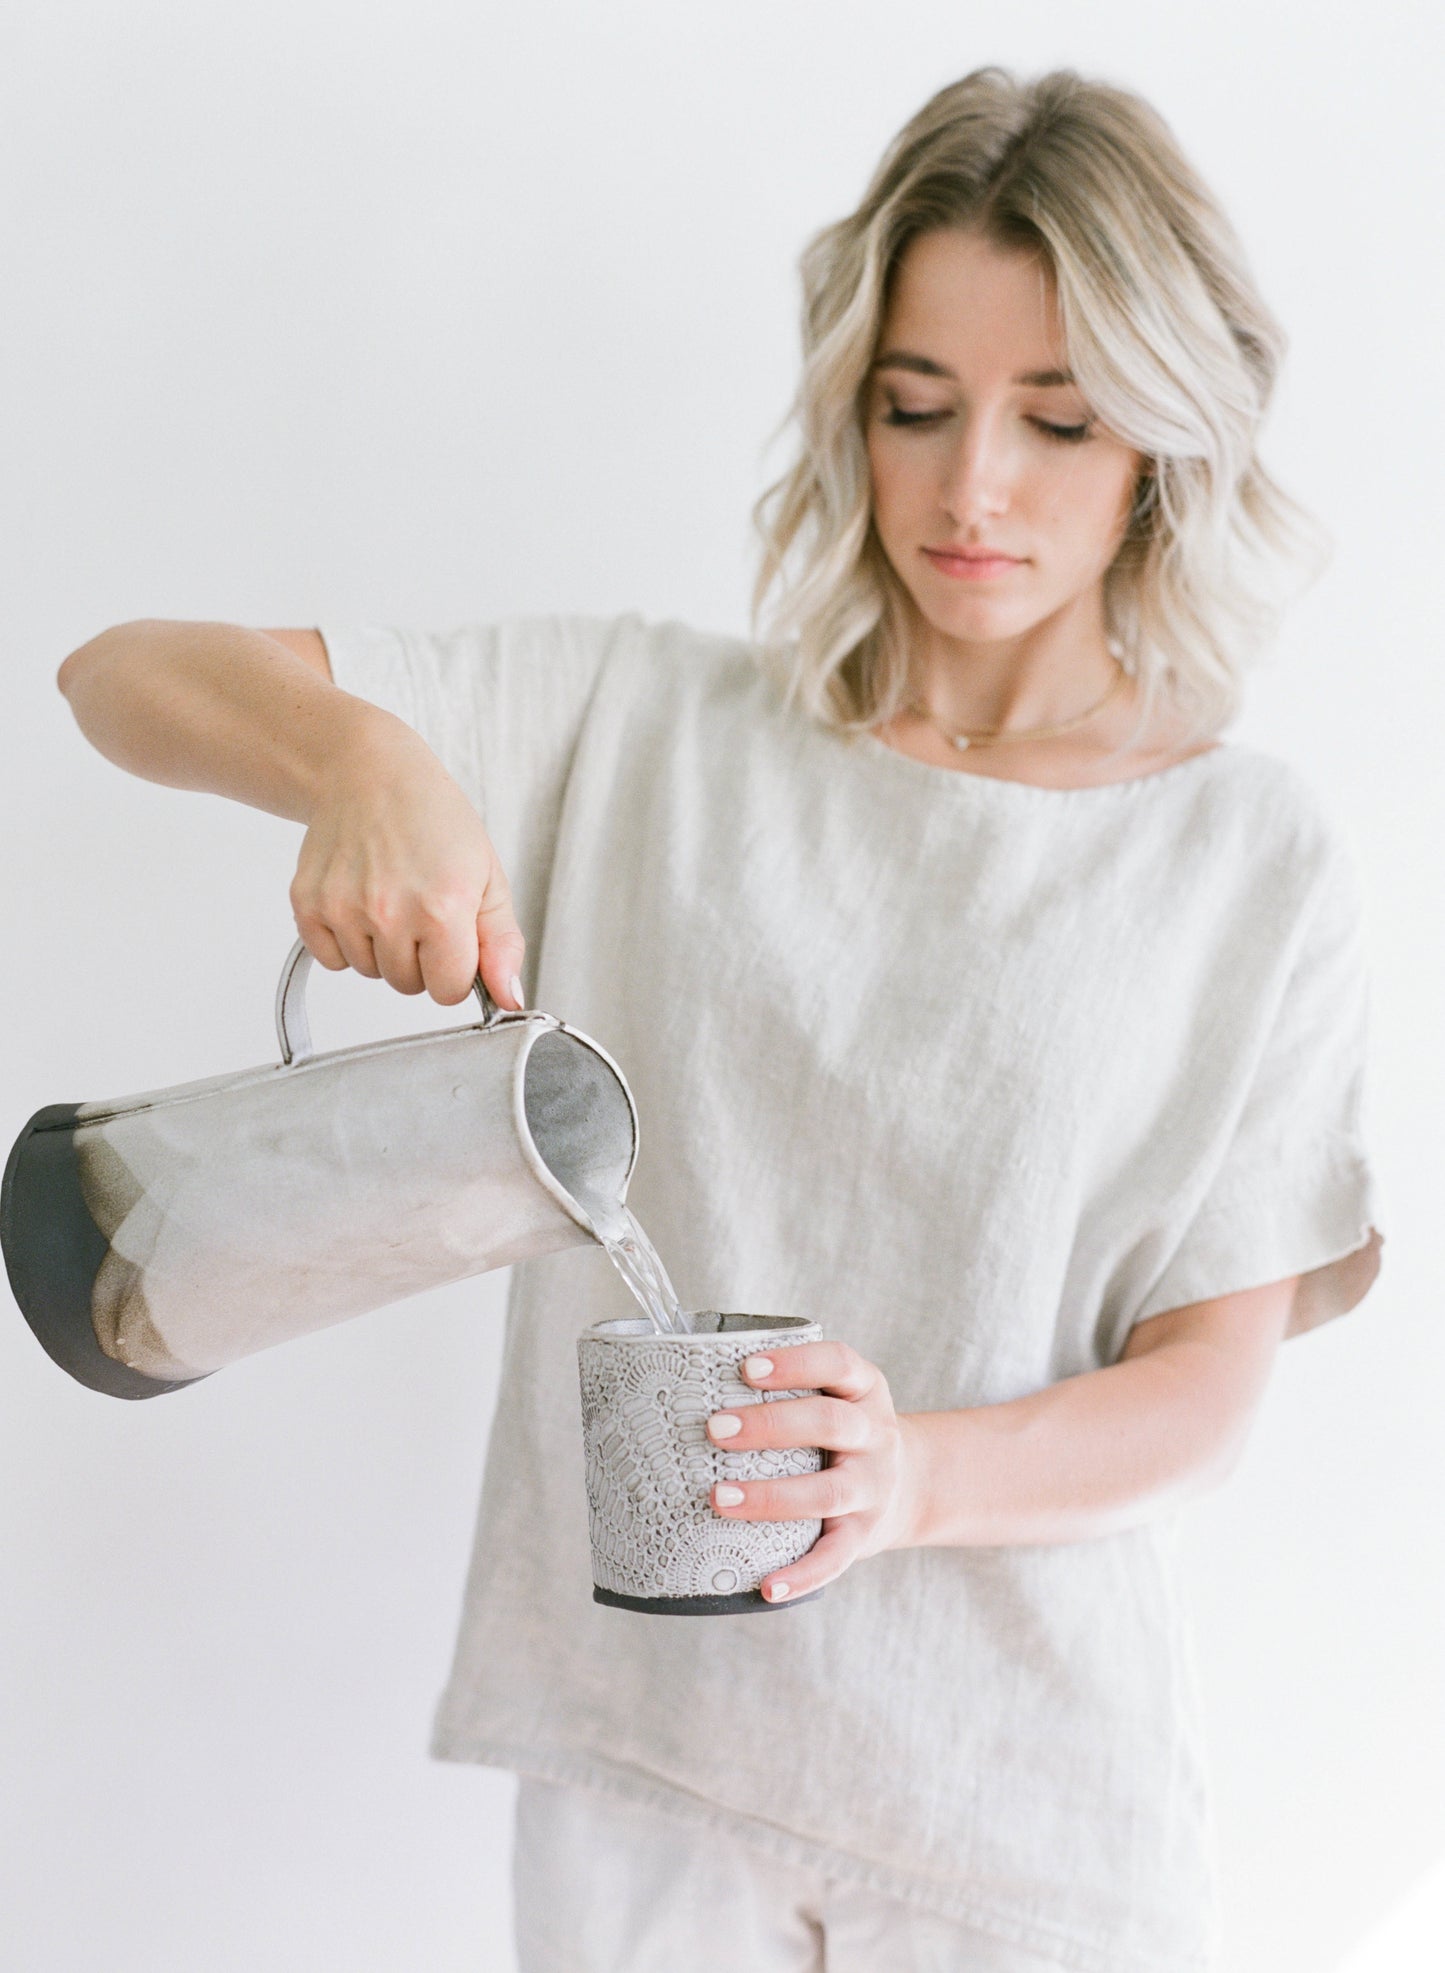 Rustic Pour Over Beverage Pitcher